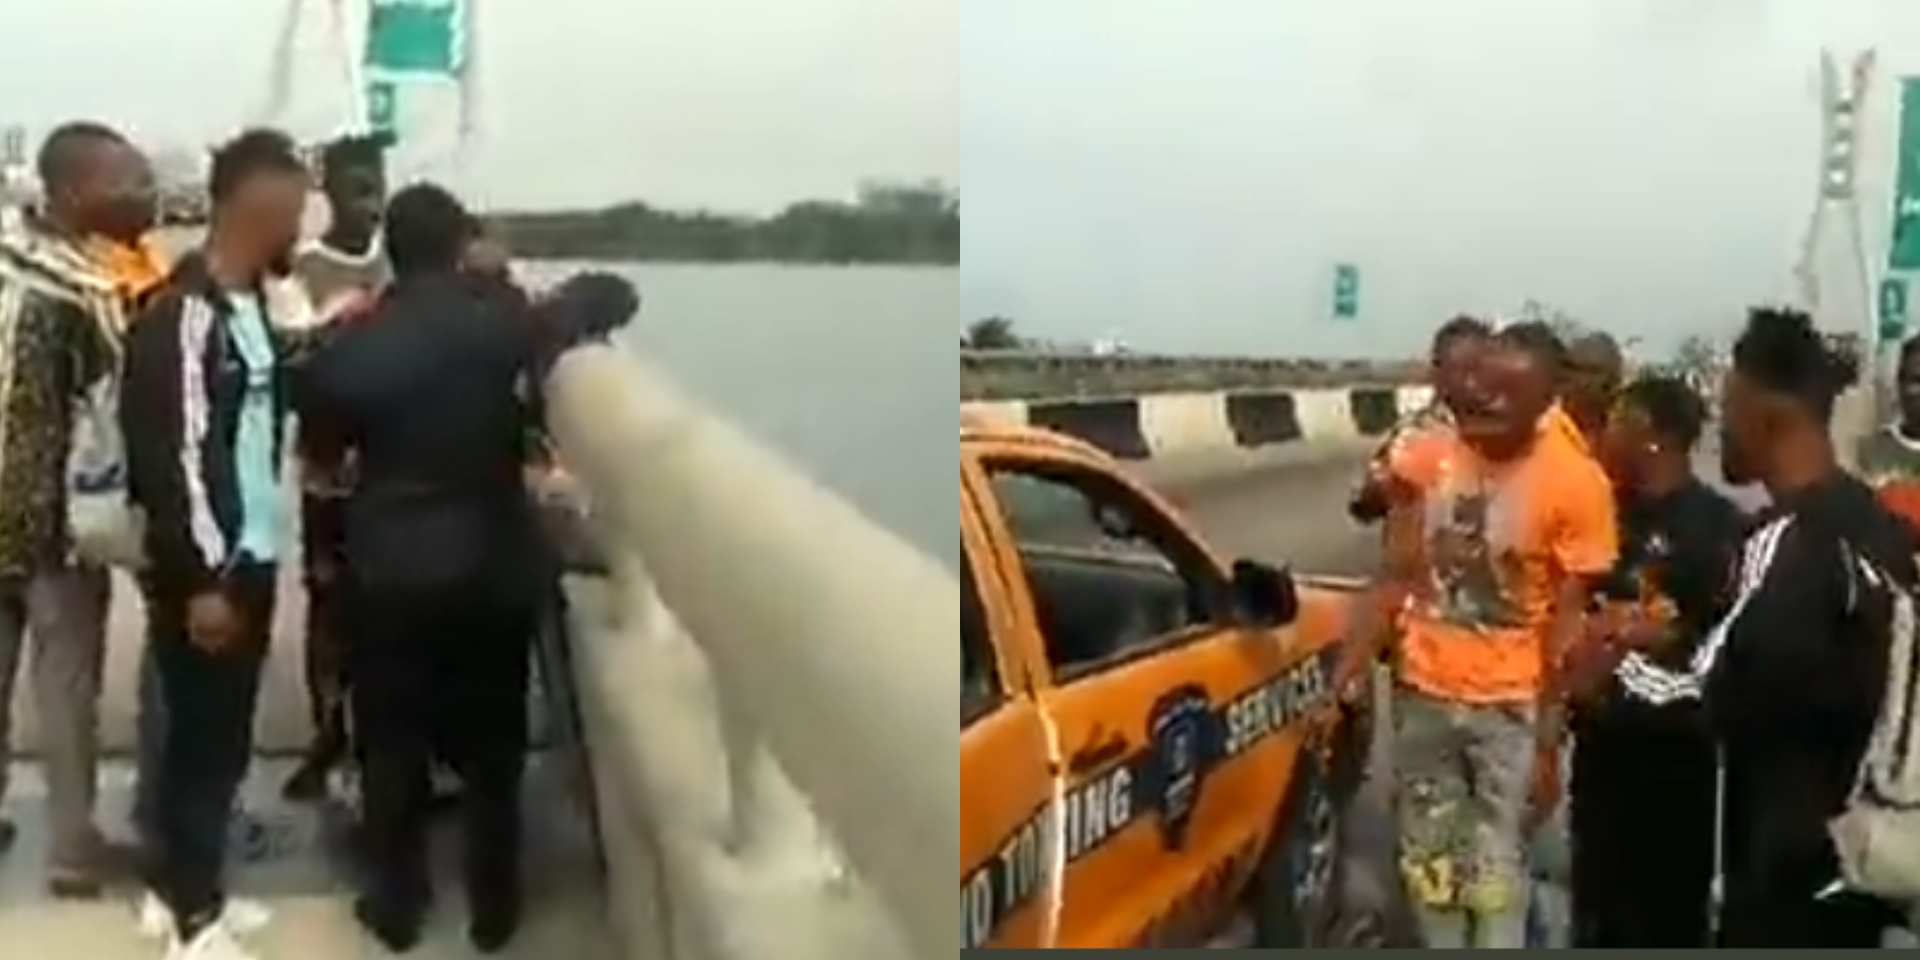 "You're a man, your future is bright" - Passersby encourage man as they stop him from committing suicide on Lekki-Ikoyi Link Bridge [Video]